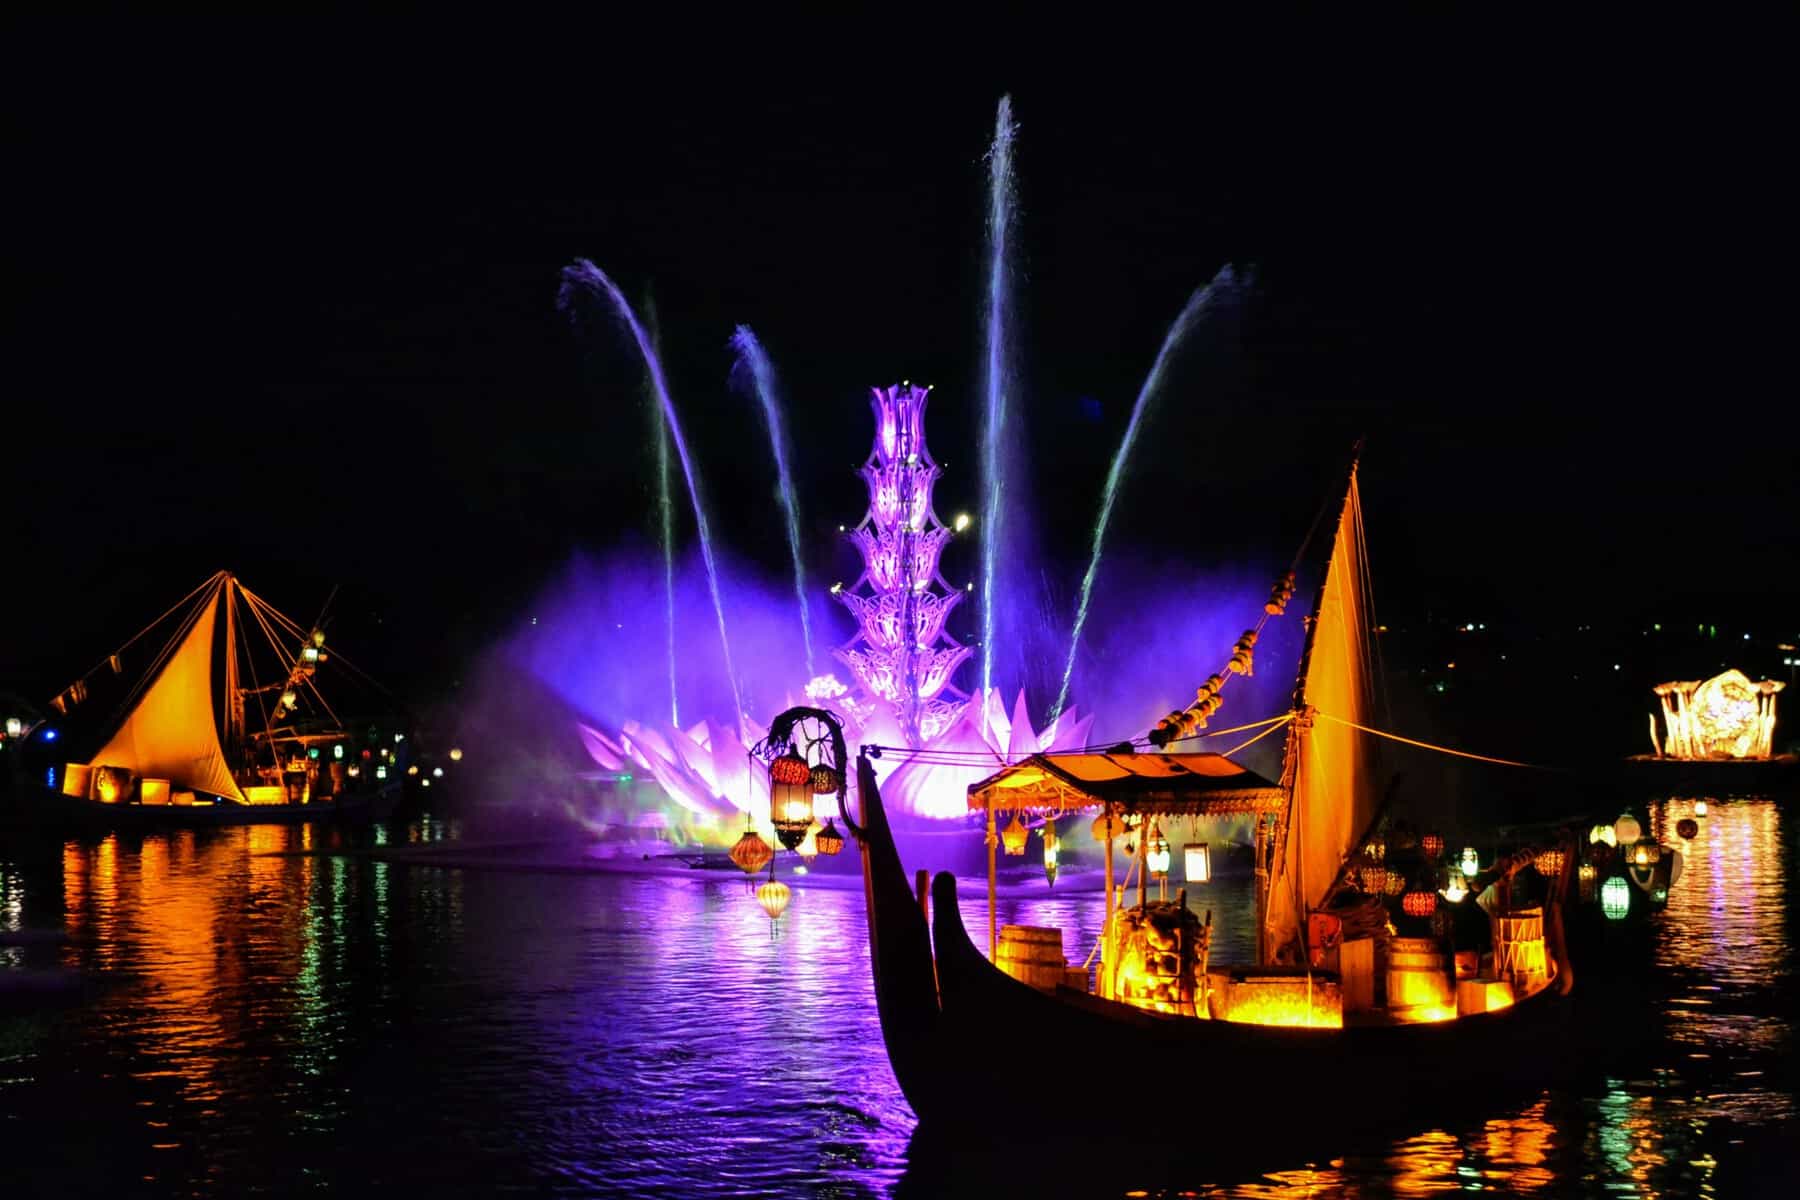 Rivers of Light viewing advice